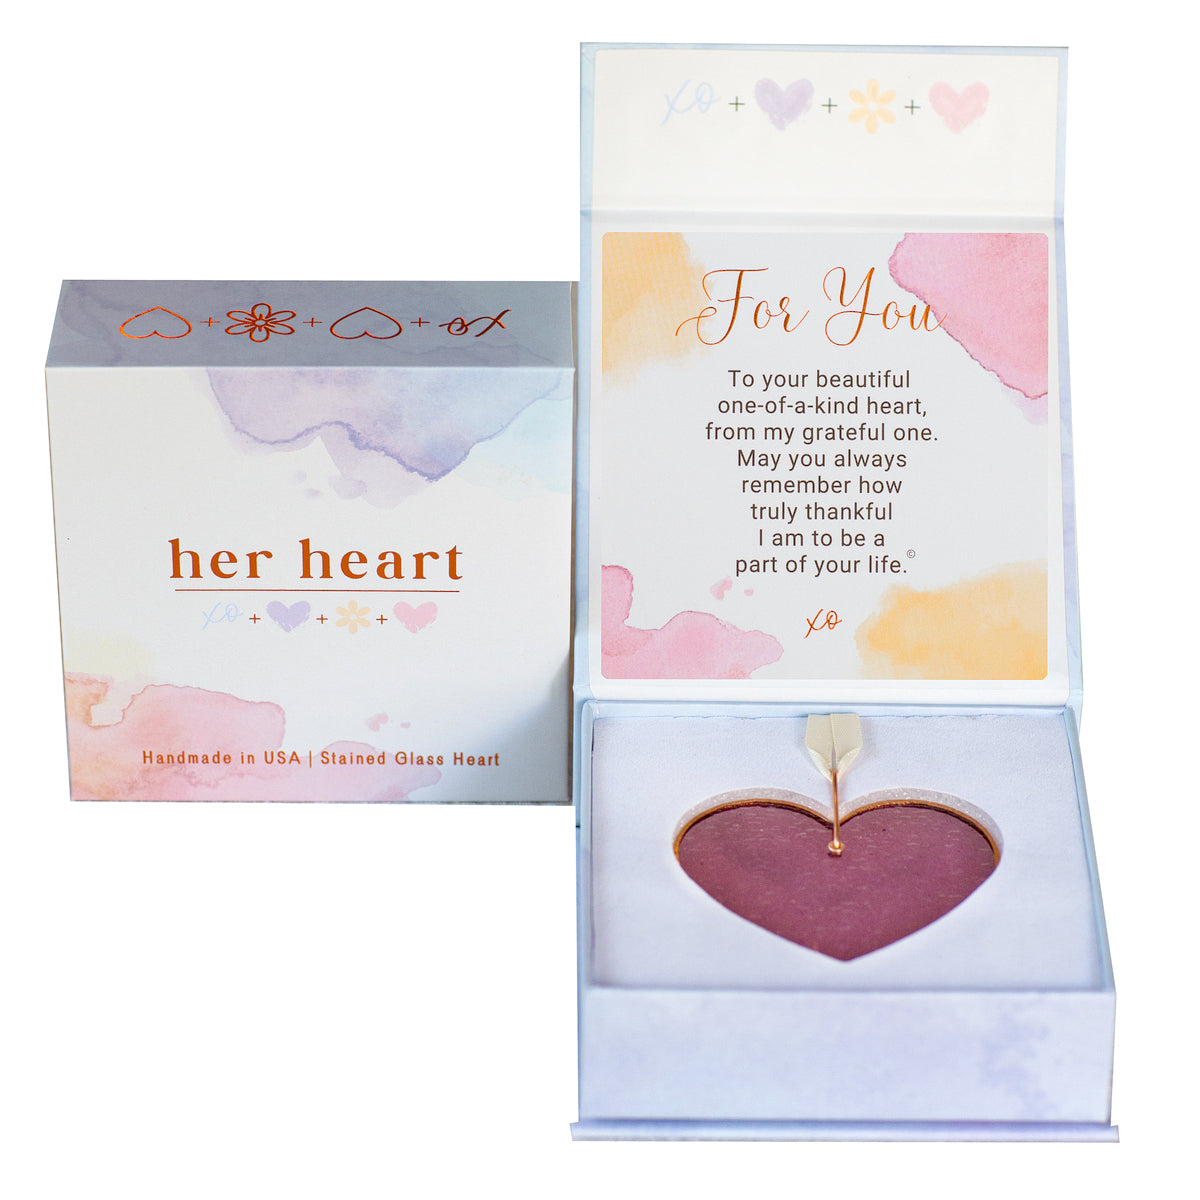 Her Heart For You gift box shown closed and open.  Open box features sentiment card and heart resting in foam cushion.